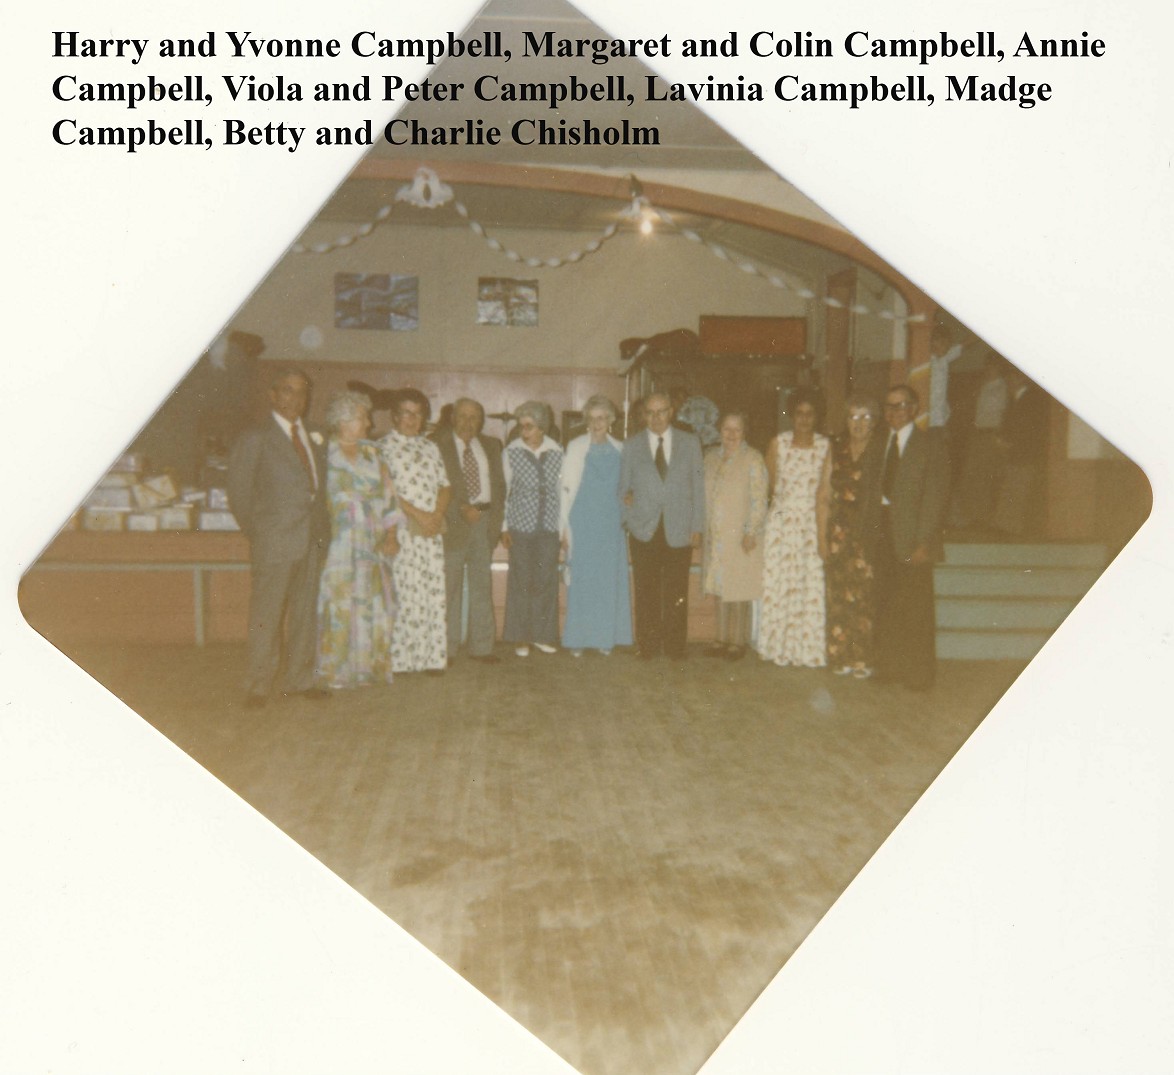 Harry and Yvonne Campbell, Colin and Margaret Campbell, Annie Campbell, Voila and Peter Campbell, Lavinia Campbell, Madge Campbell, Betty and Charlie Chisholm